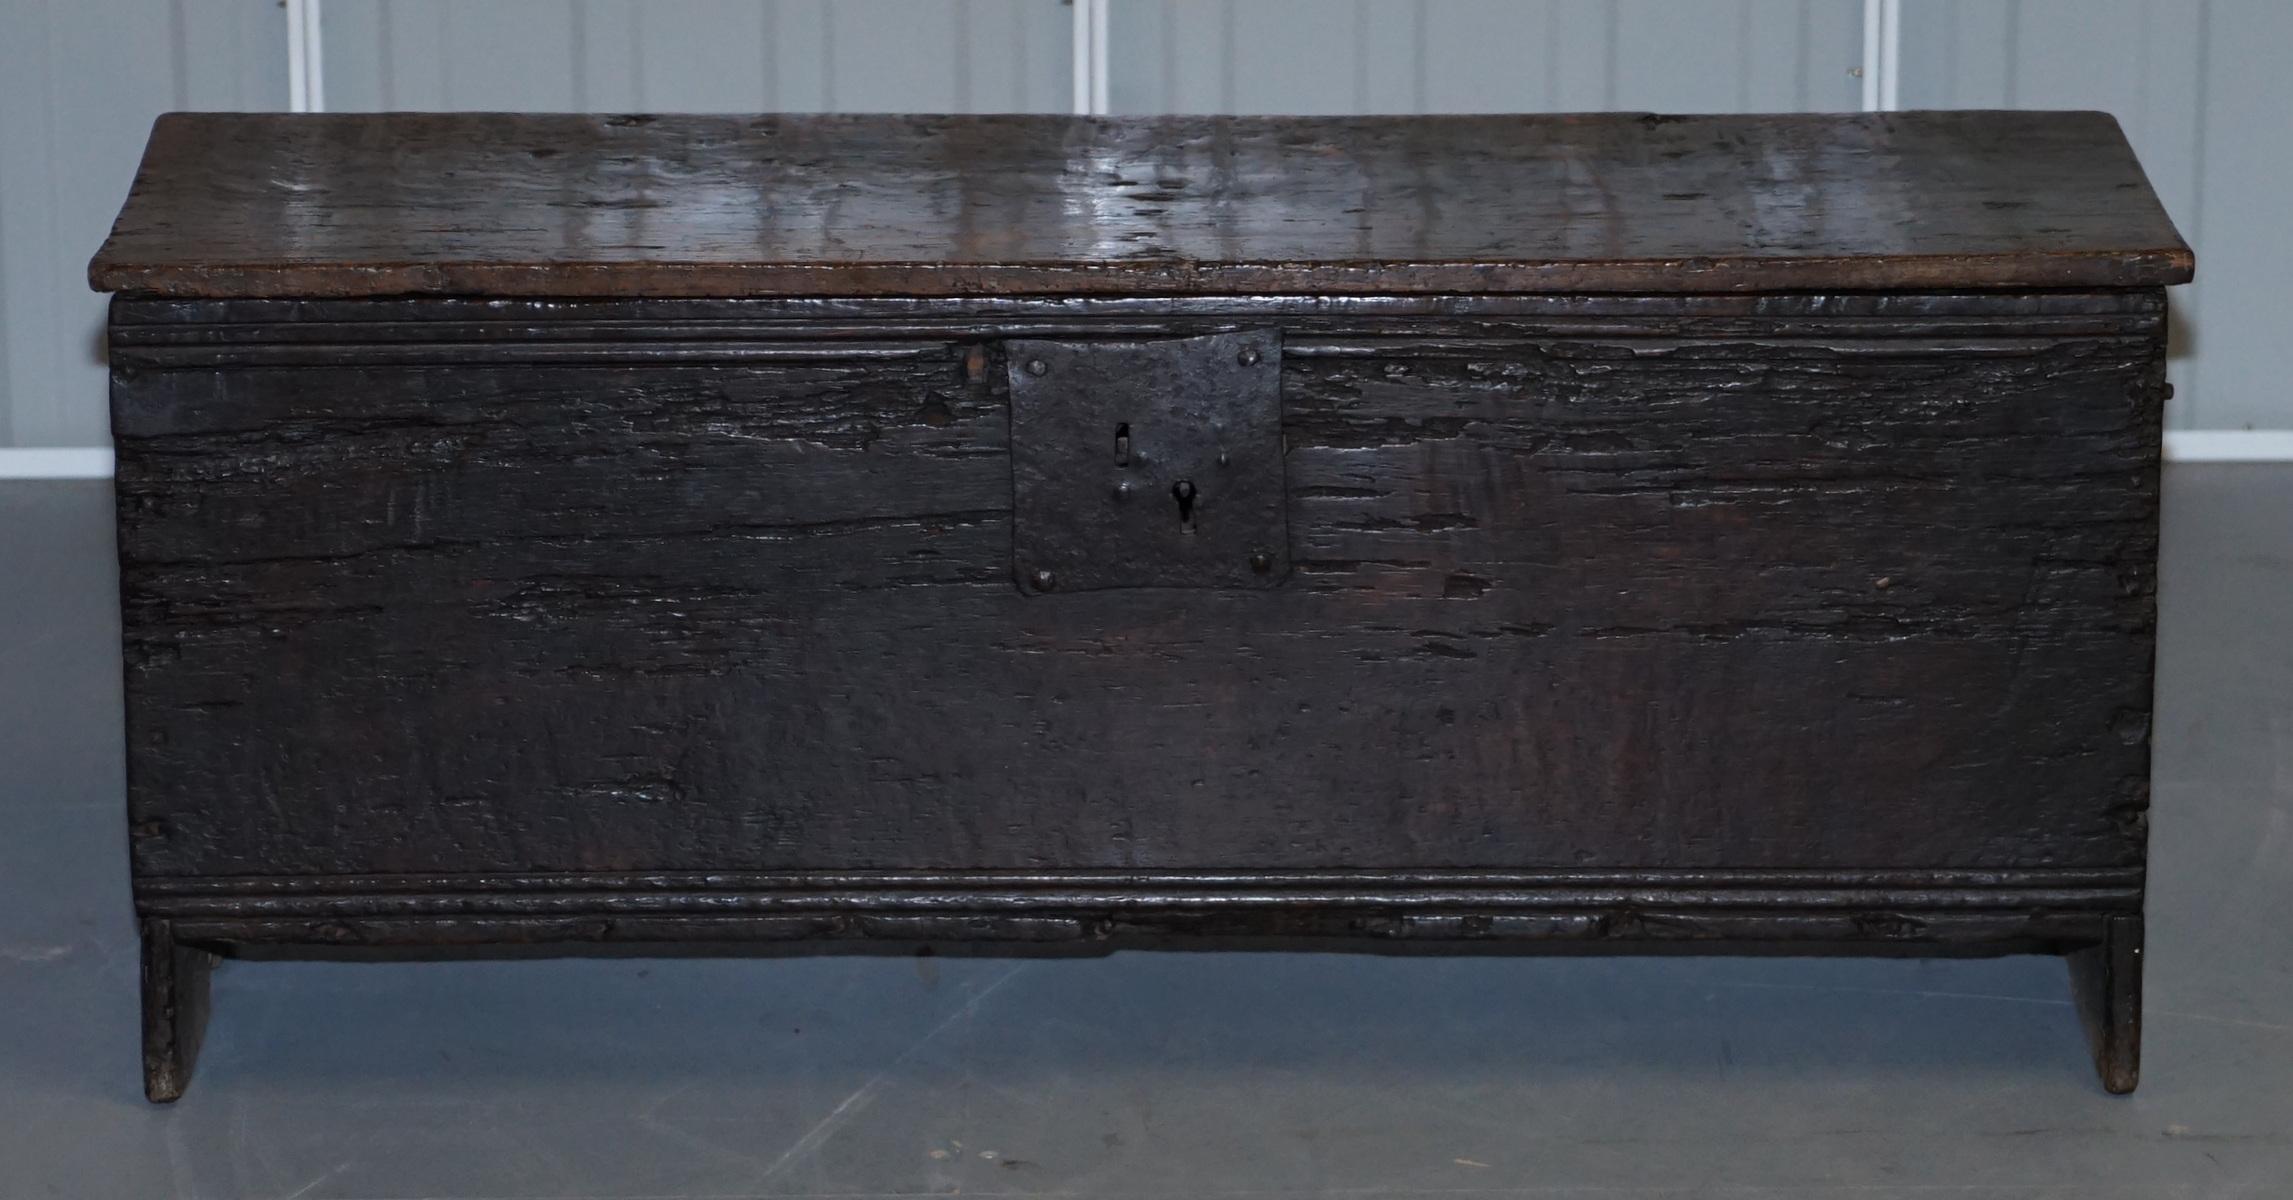 We are delighted to offer for sale this absolutely stunning very rare original 18th century oak coffer, circa 1720

A sublime looking piece, traditionally made as a six plank chest, the lock and handles are thick hand hammered iron and totally